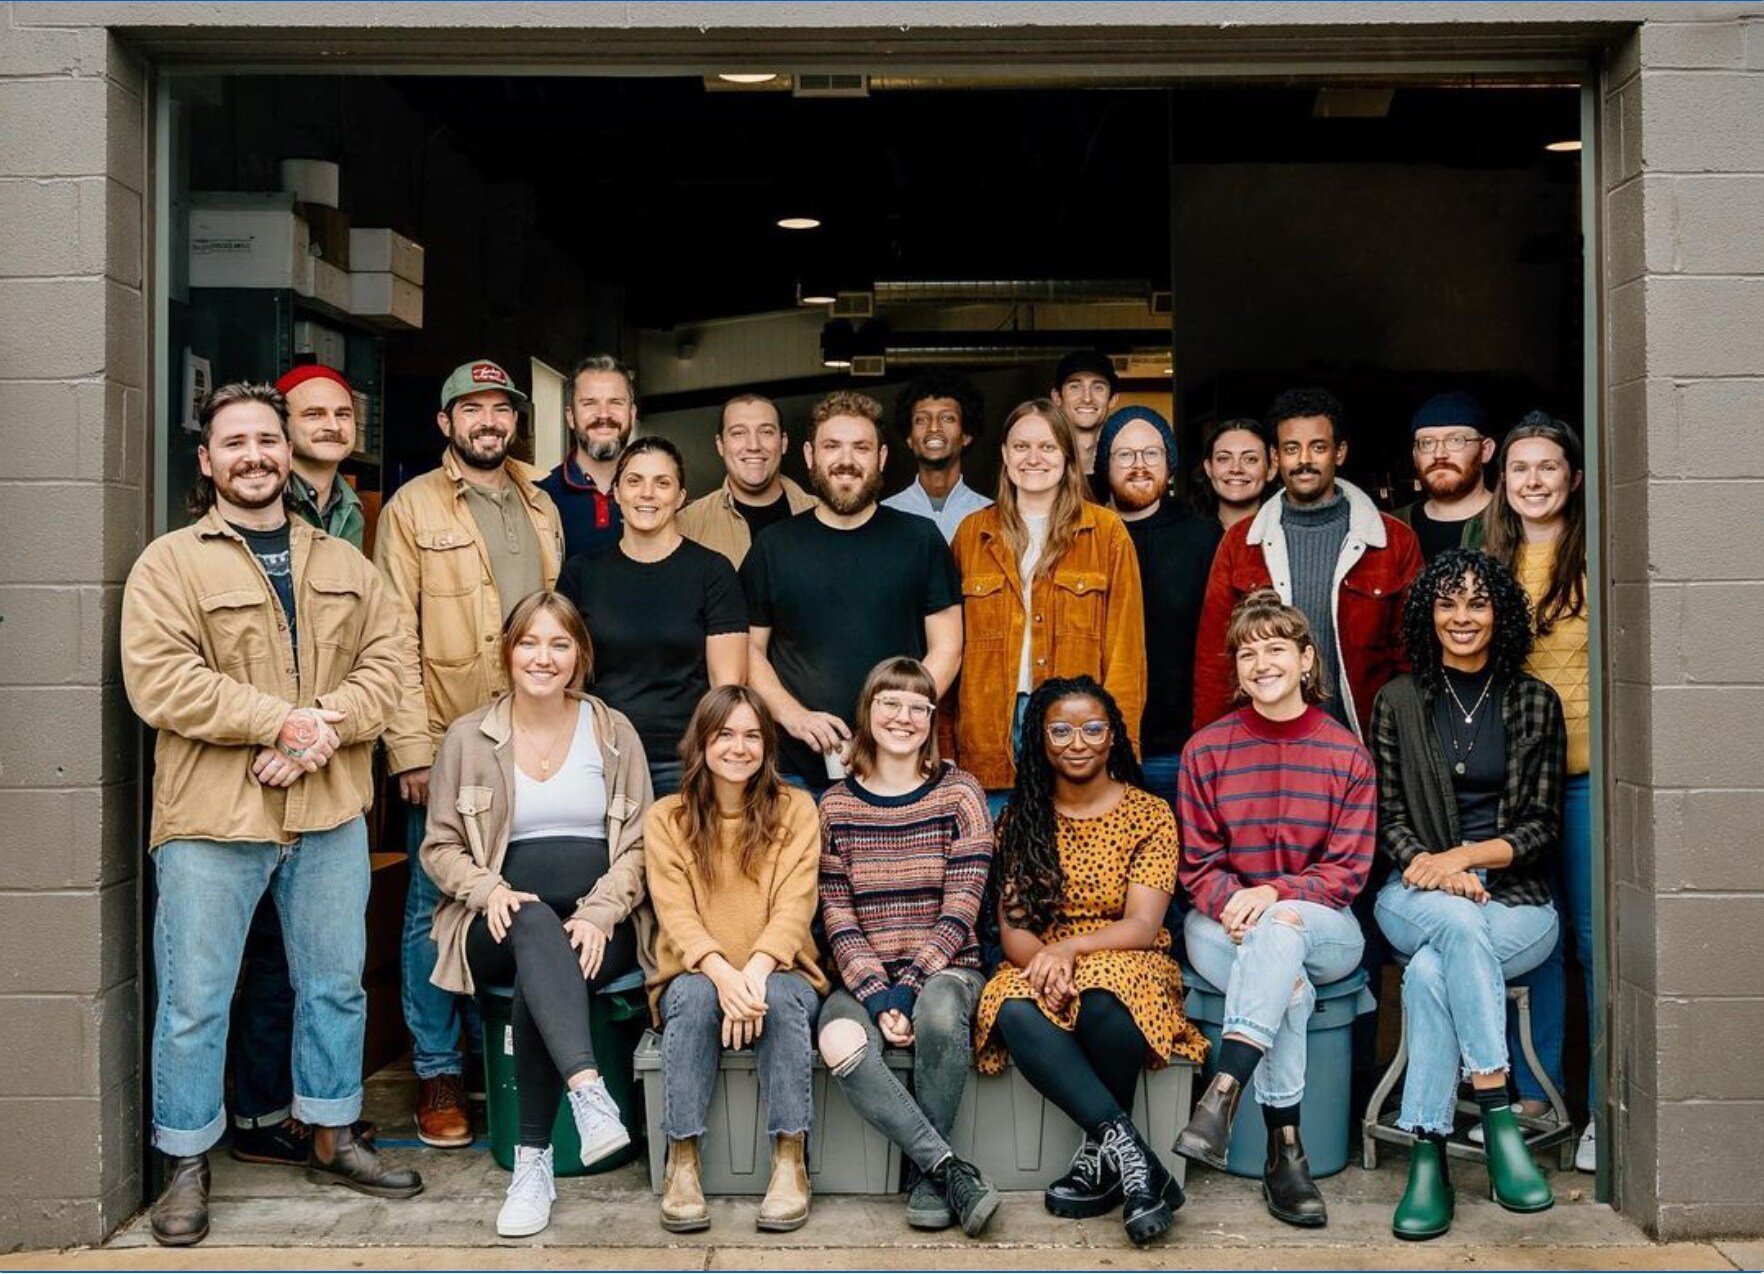 Today, we want to give a shoutout to our amazing roasting partner, @passengercoffee. From day one, they've been an invaluable source of support and inspiration for our team, providing exceptional coffee, equipment, and ideas to help us deliver the be